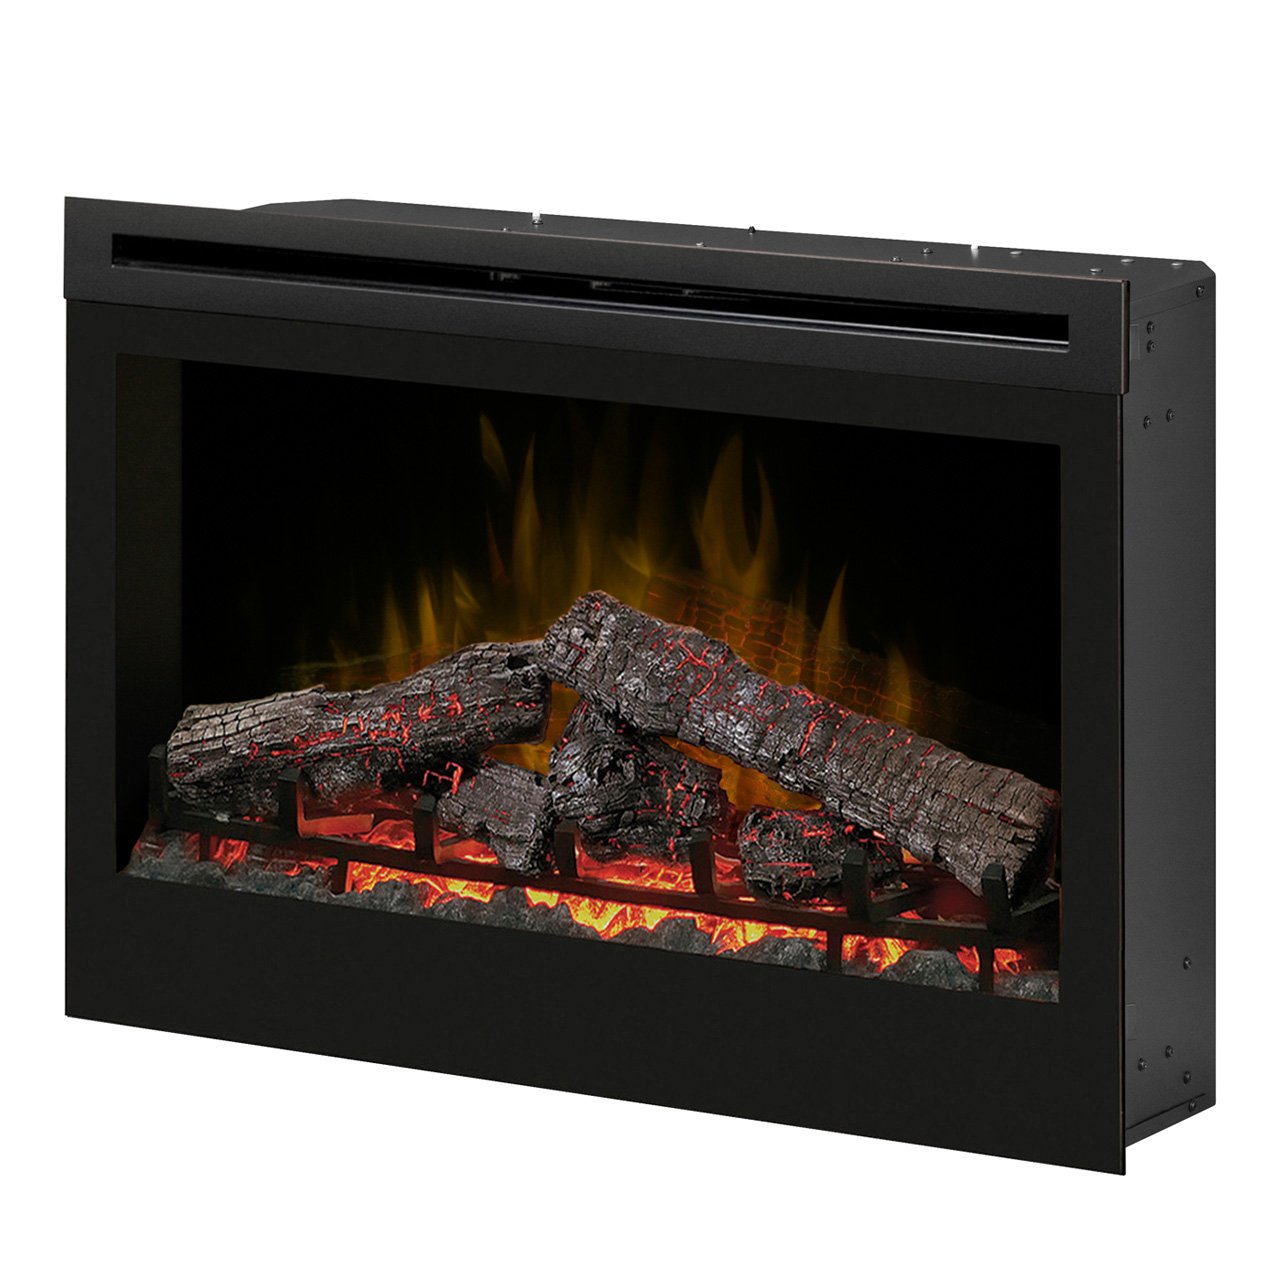 Garage Fireplace Best Of Dimplex Df3033st 33 Inch Self Trimming Electric Fireplace Insert